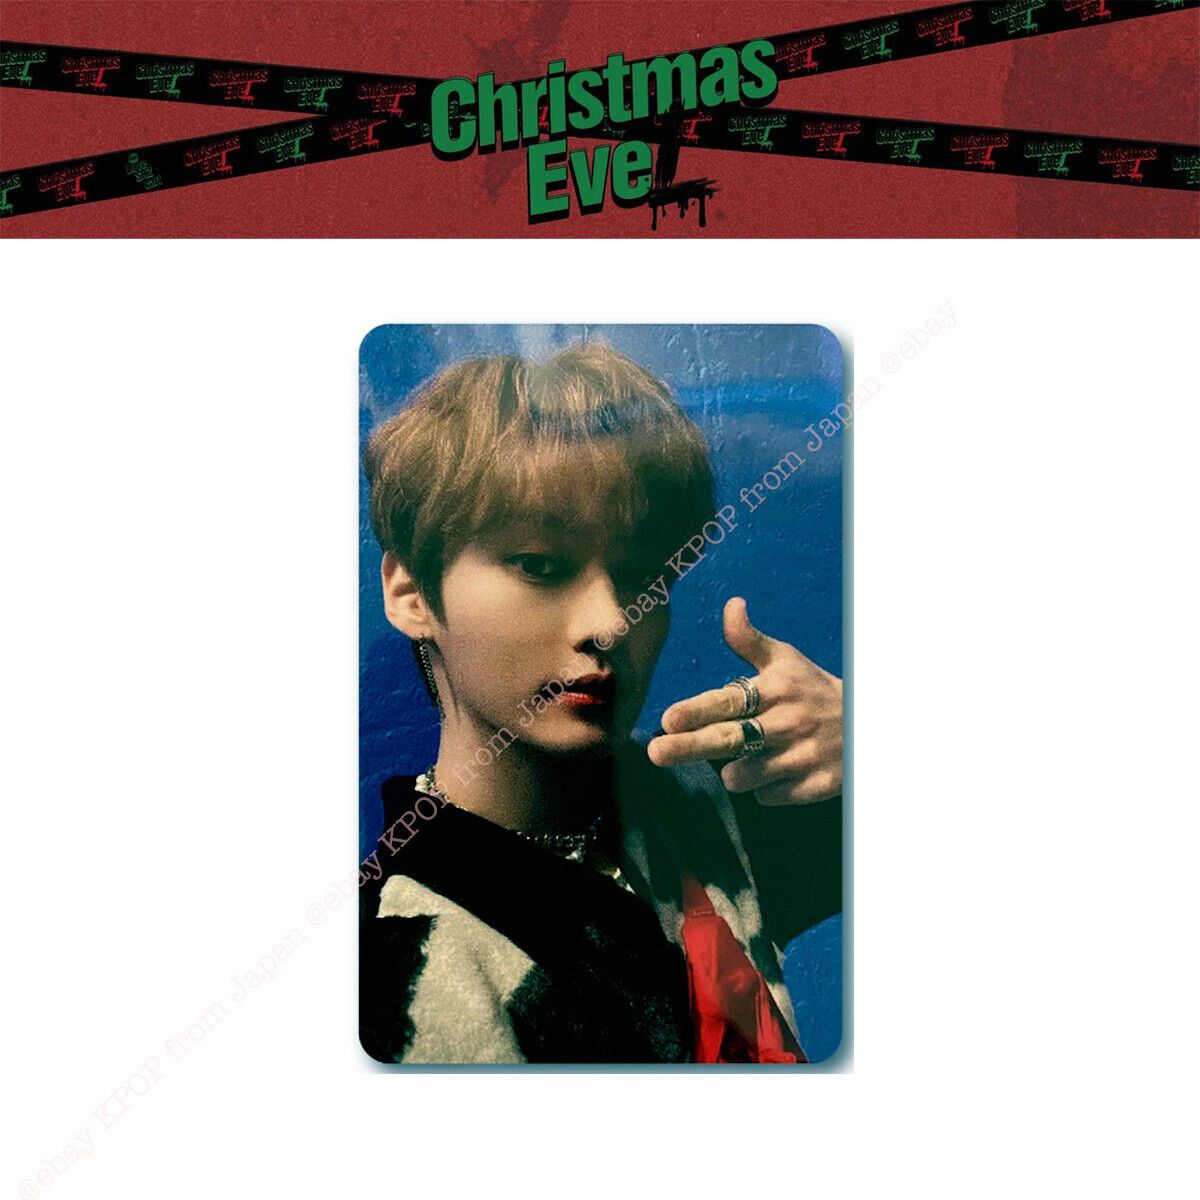 Stray Kids Christmas Evel SUBK SHOP Exclusive Official Photocard 